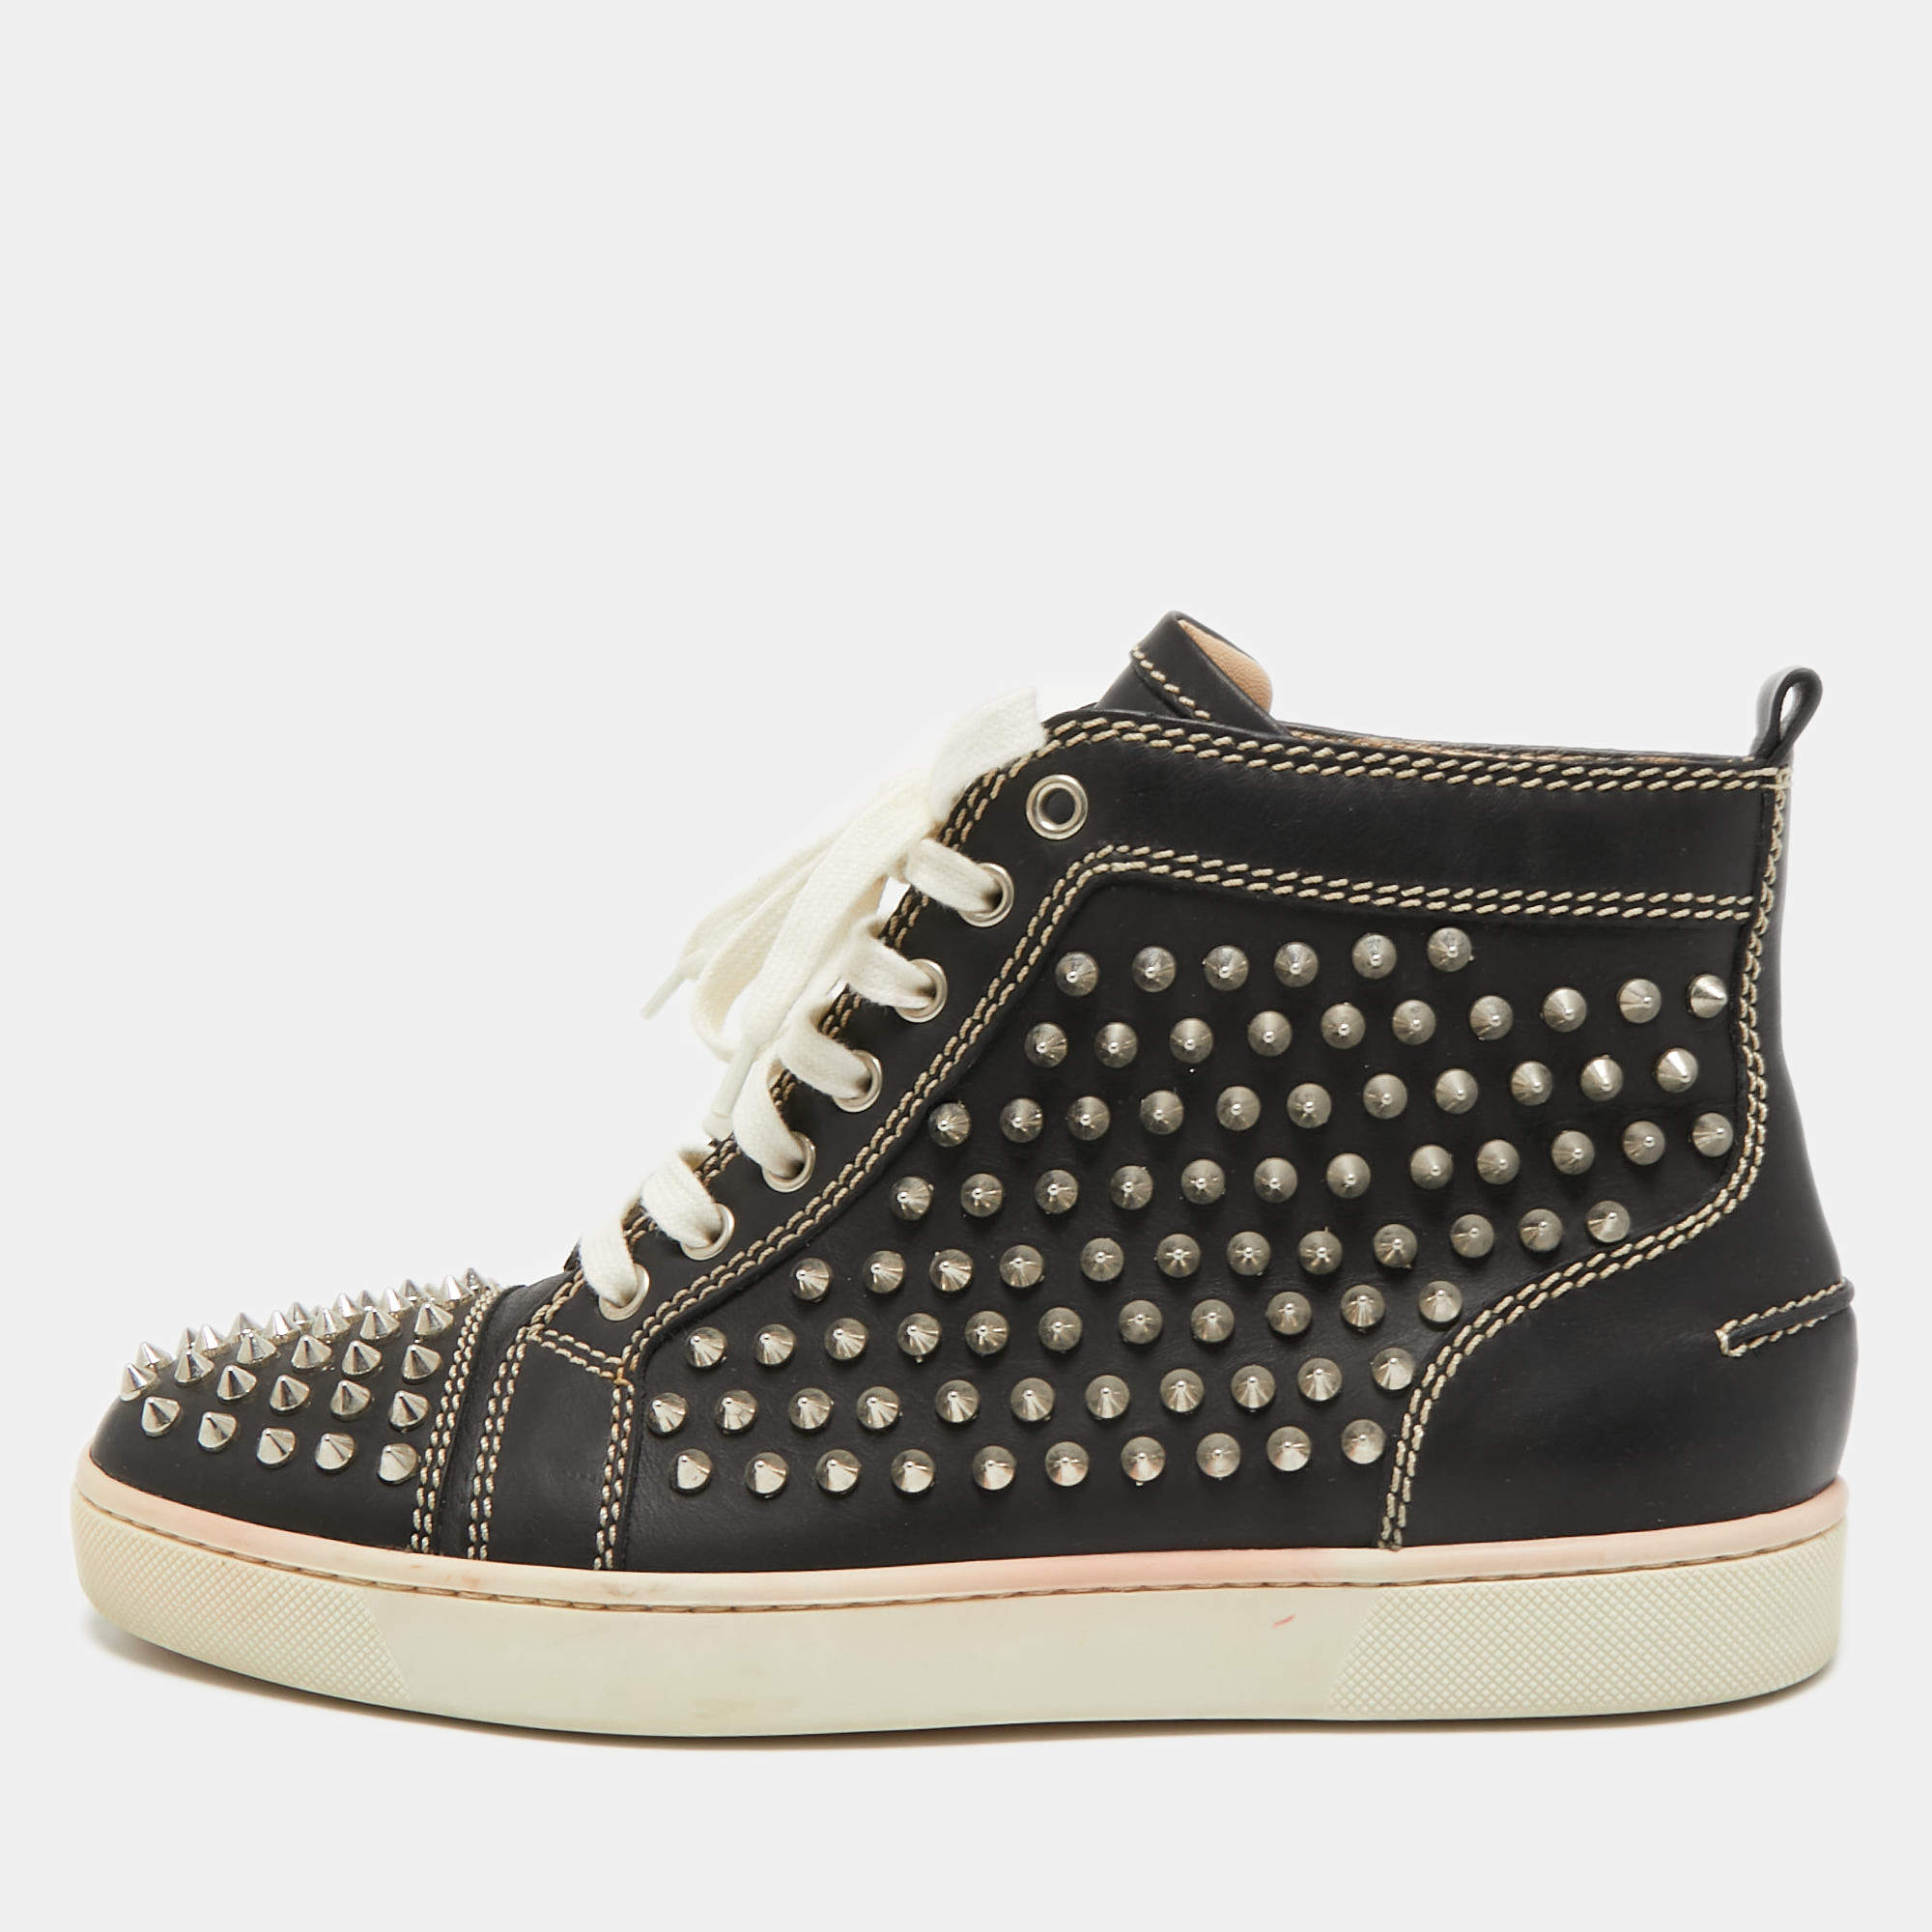 Christian Louboutin Black Leather Louis Spikes High Top Sneakers Size 40 Louboutin TLC